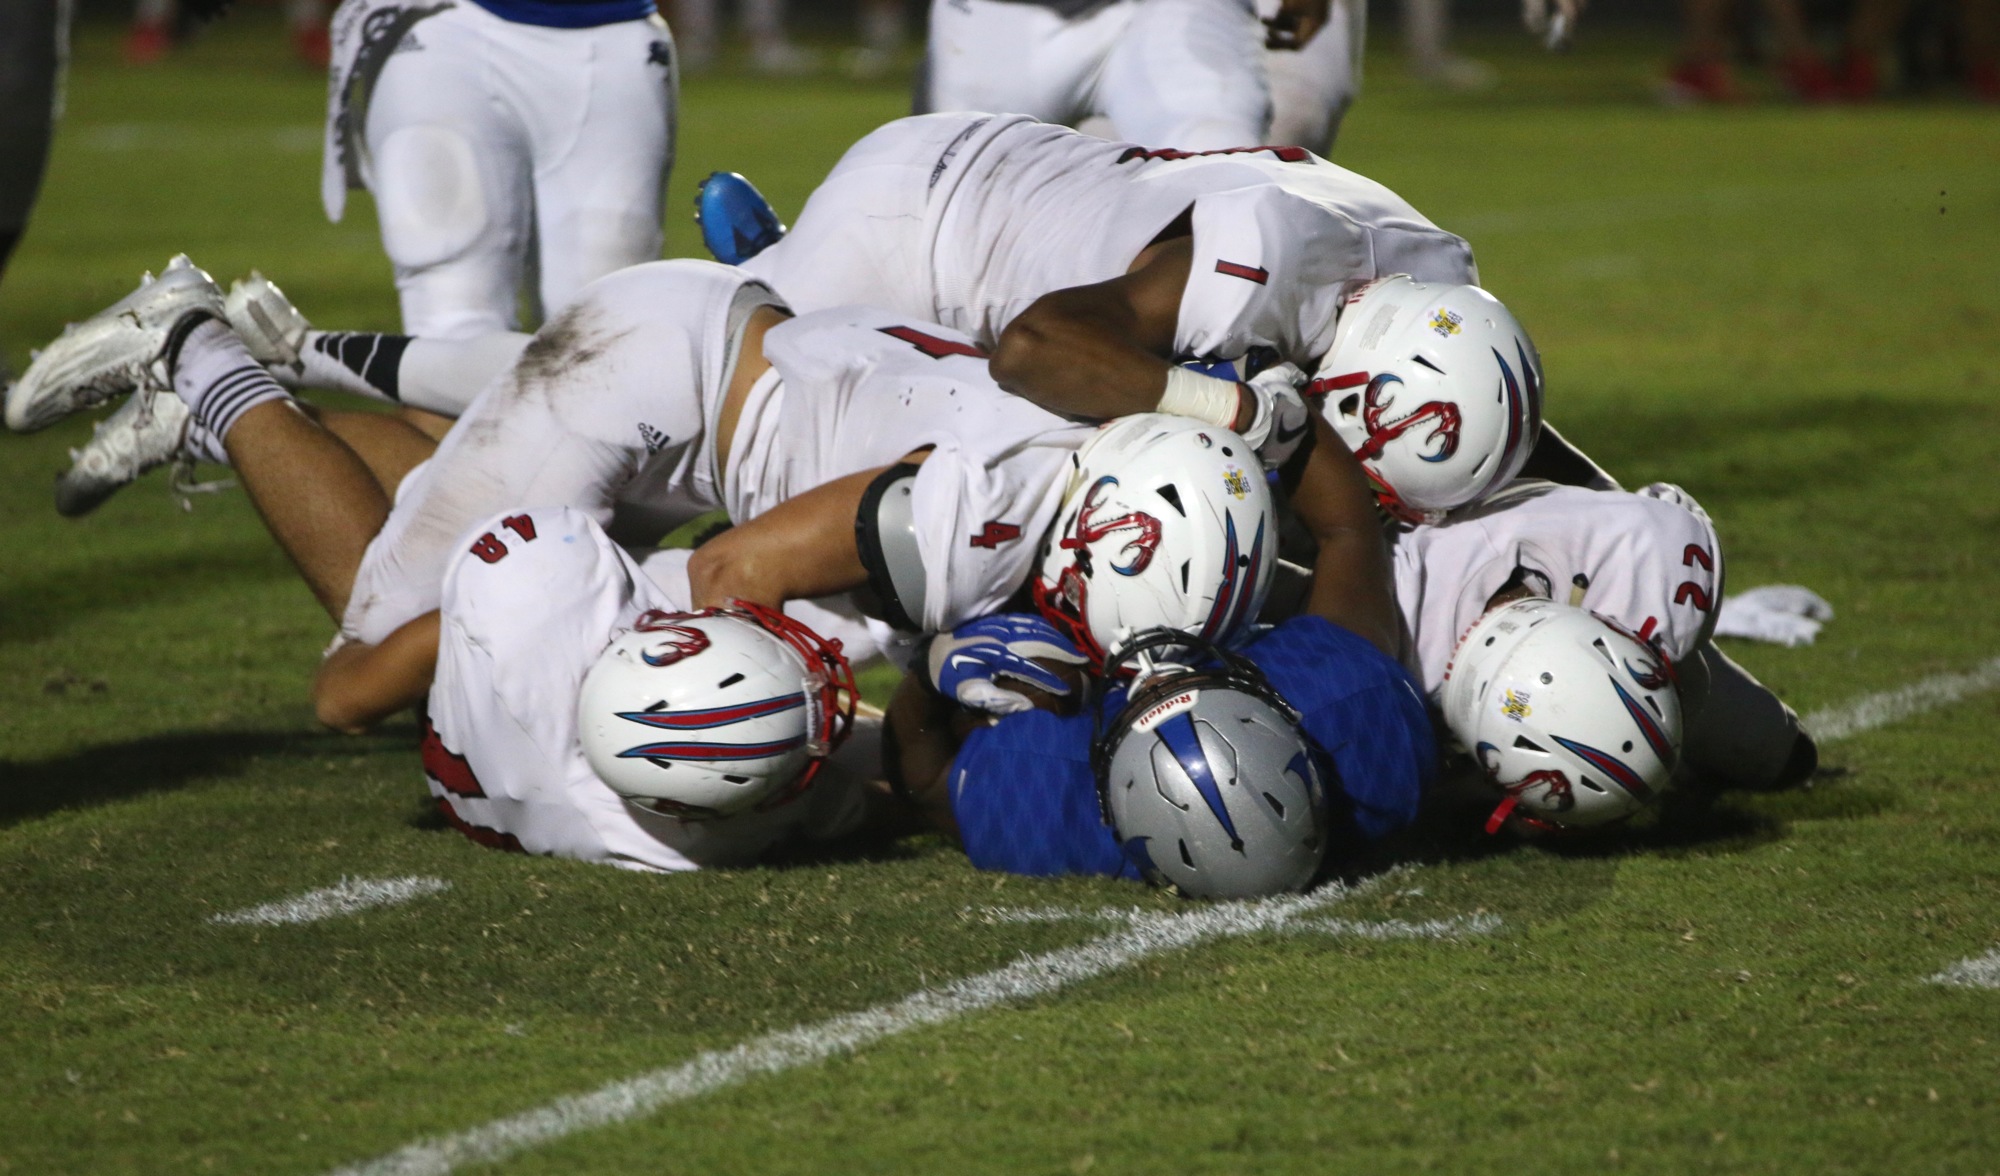 Matanzas running back Trenton Steward is tackled by a group of Seabreeze players. Photo by Ray Boone